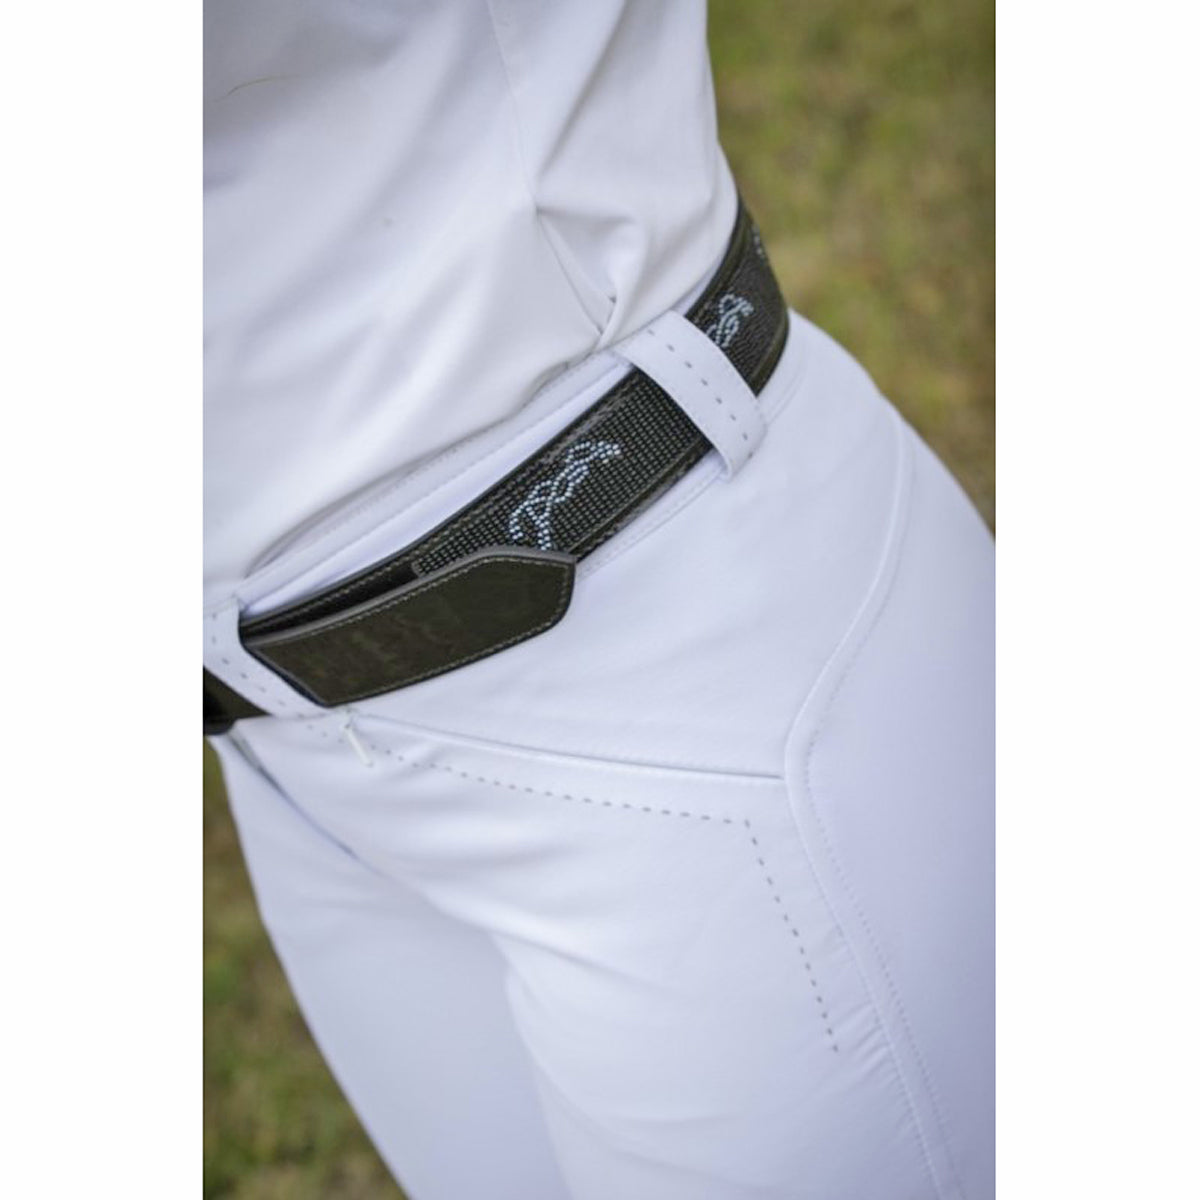 Women's Country and Equestrian Style Belts